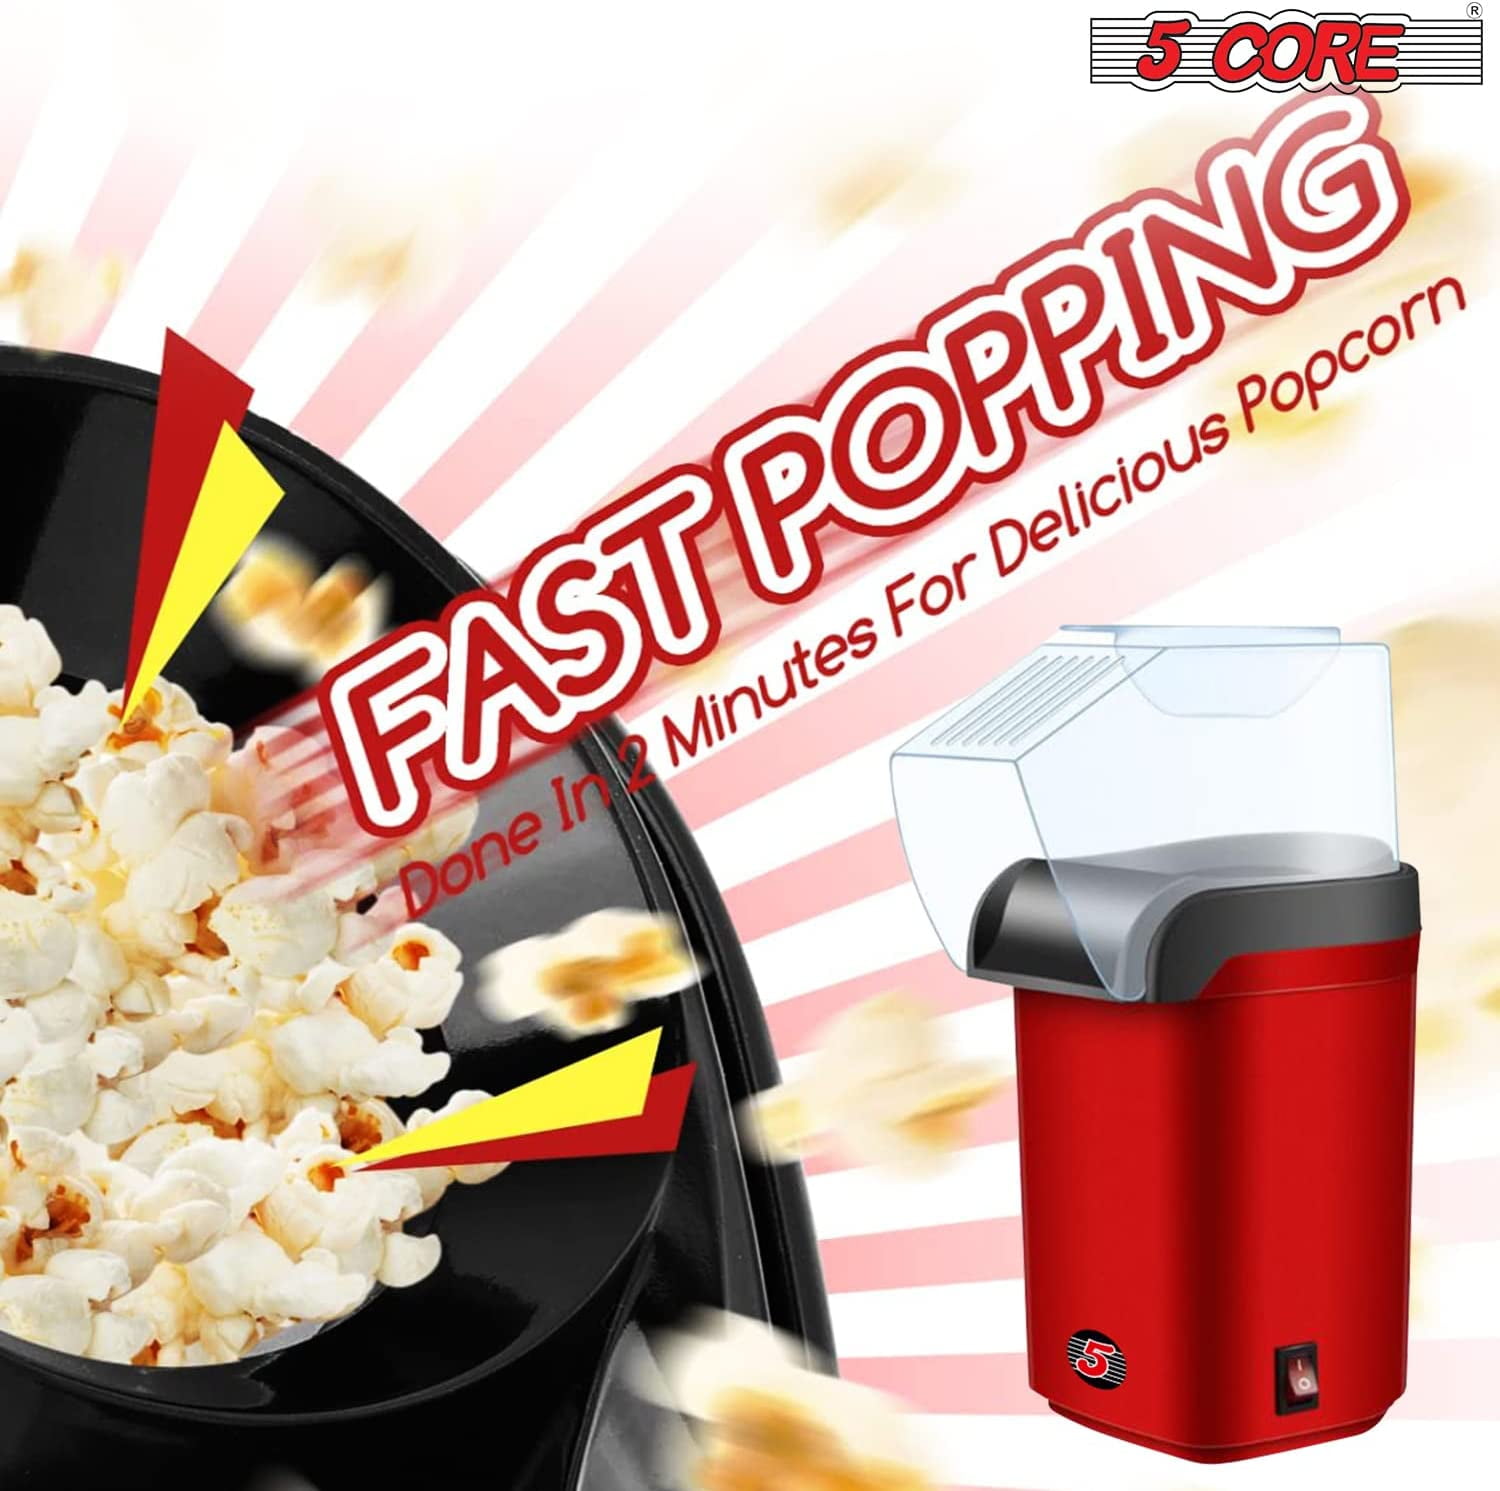 VAlinks Hot Air Popcorn Machine, Popcorn Maker, 1200W Home Electric Popcorn  Popper with Kernel Measuring Scoop, Healthy Oil-Free & BPA-Free for Home